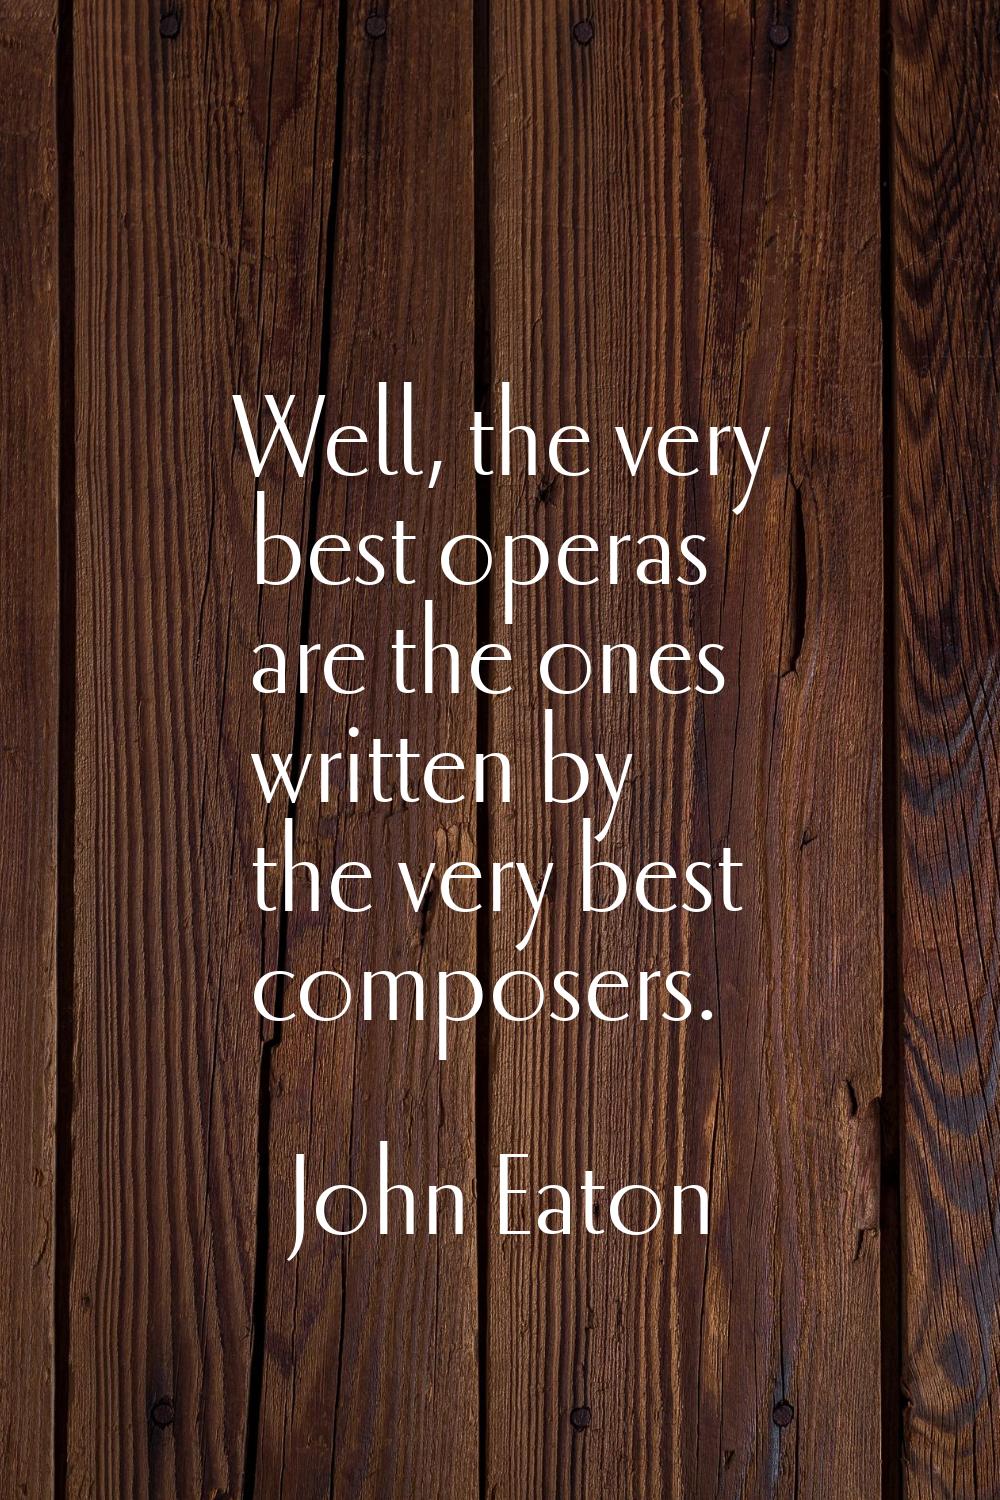 Well, the very best operas are the ones written by the very best composers.